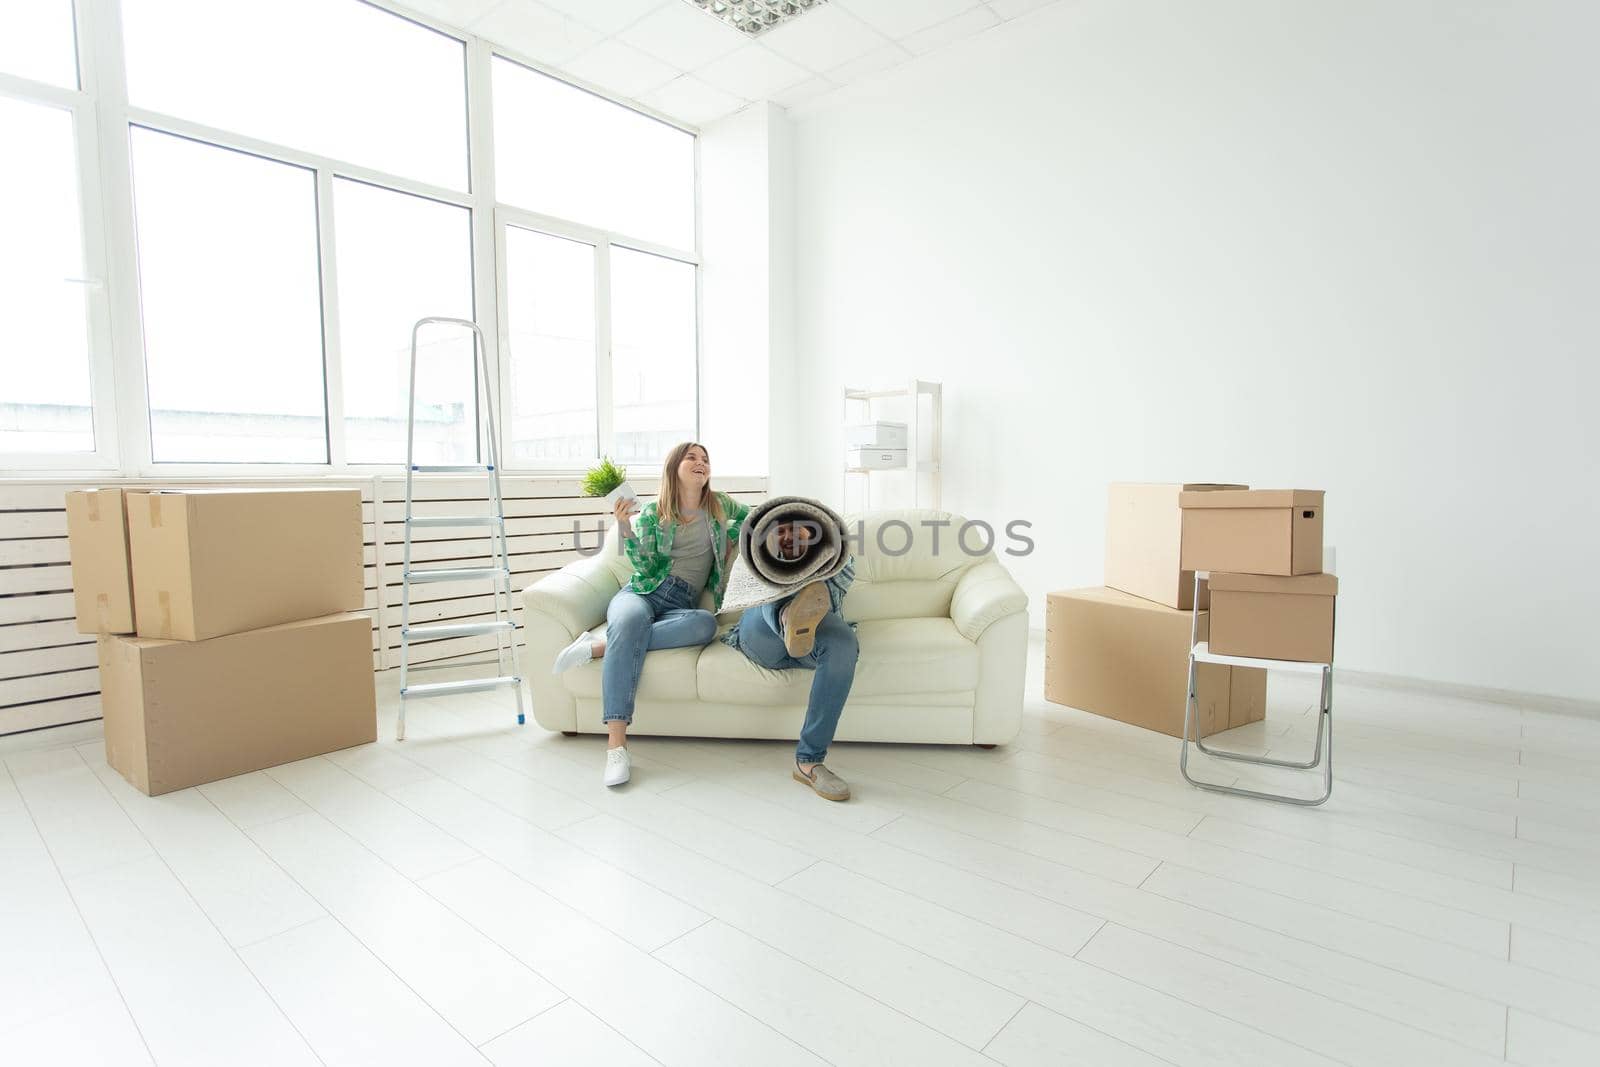 Cheerful joyful young couple charming girl and handsome man holding a box with things and a pot with a plant while moving to a new apartment. Housewarming and mortgage concept